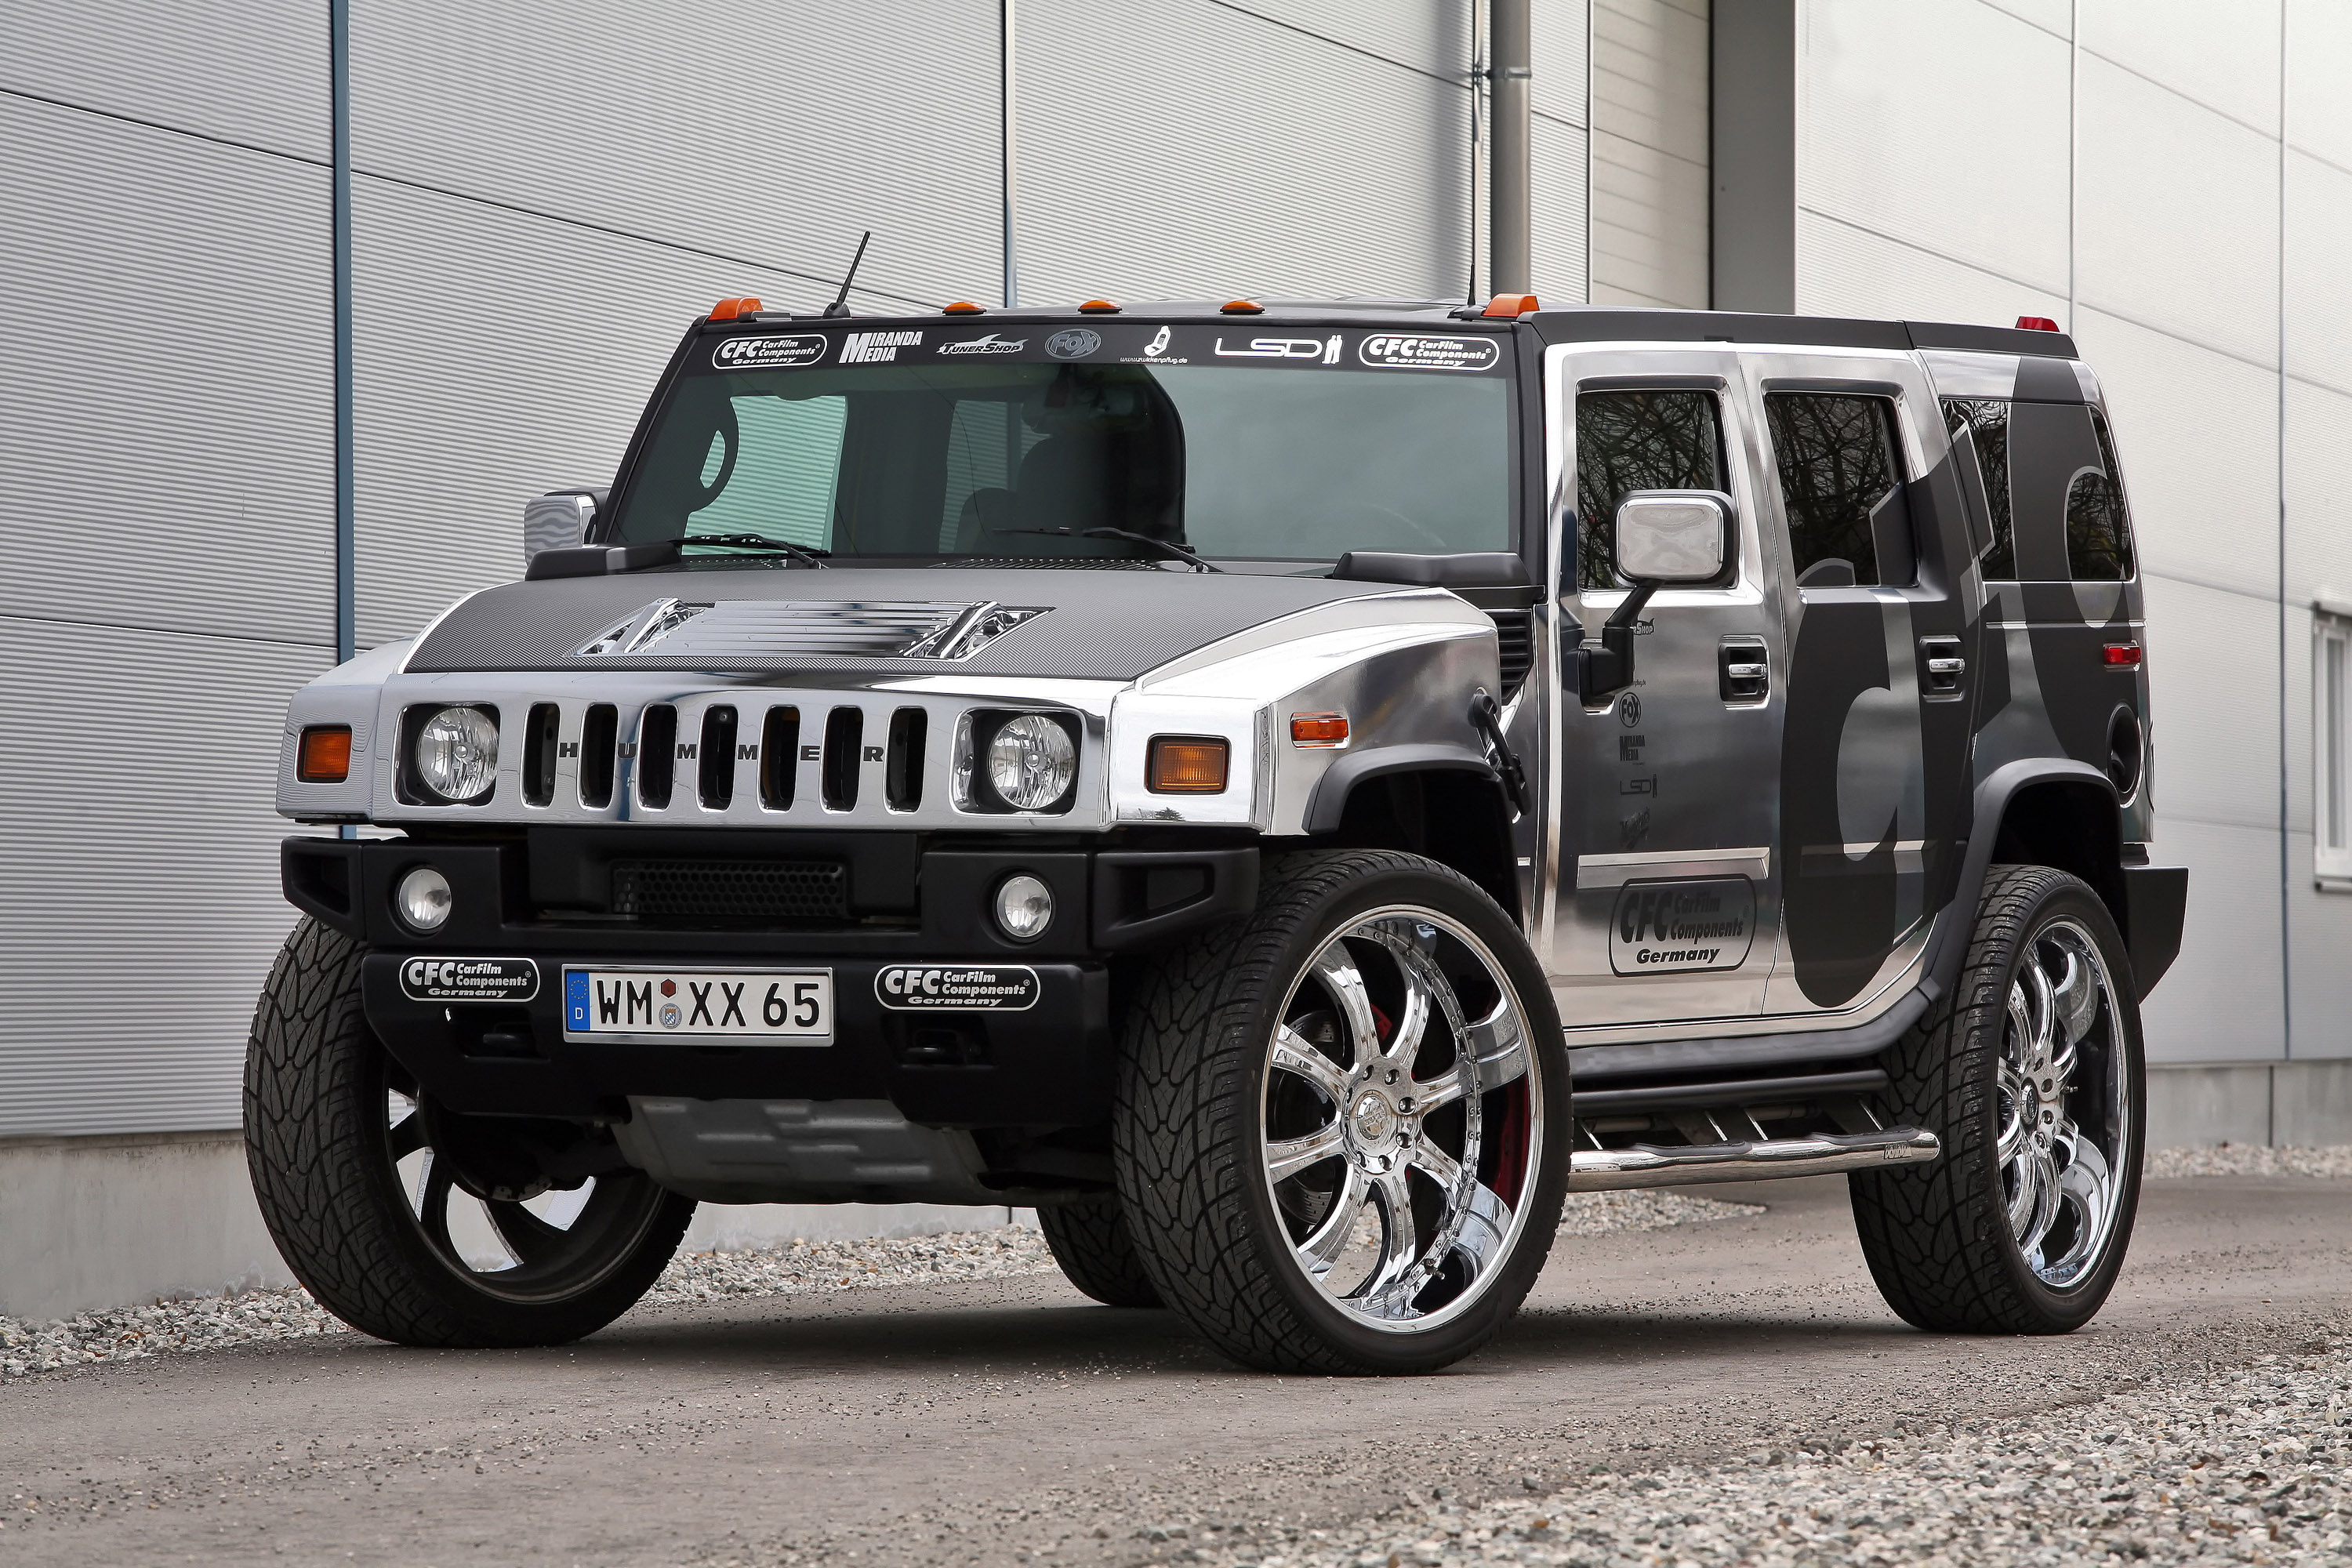 Widescreen image cfc, hummer, cars, h2